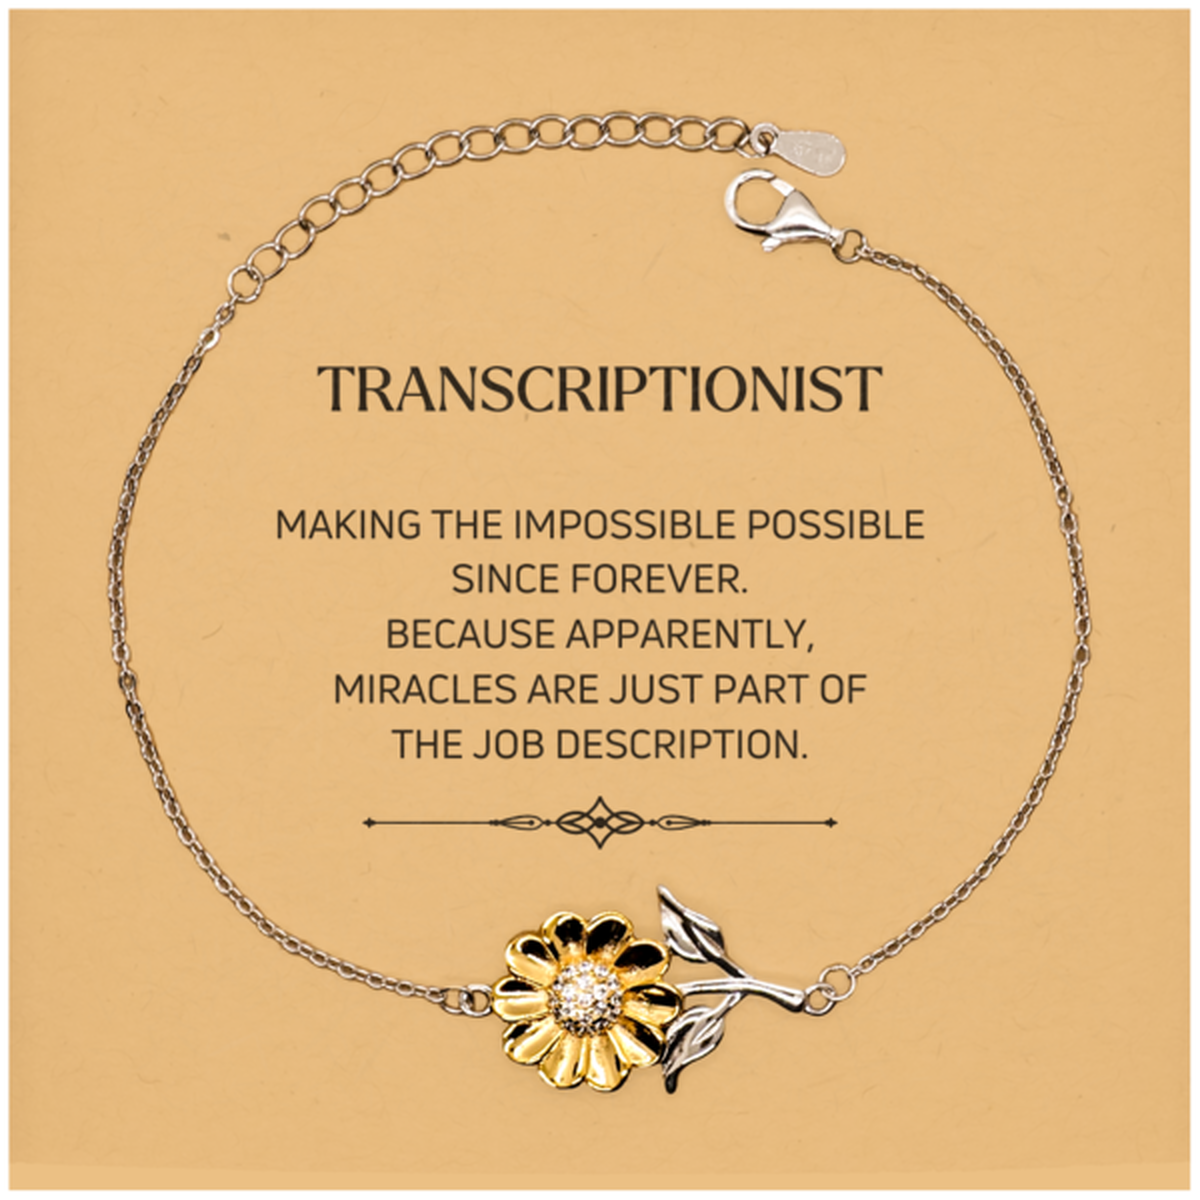 Funny Transcriptionist Gifts, Miracles are just part of the job description, Inspirational Birthday Christmas Sunflower Bracelet For Transcriptionist, Men, Women, Coworkers, Friends, Boss